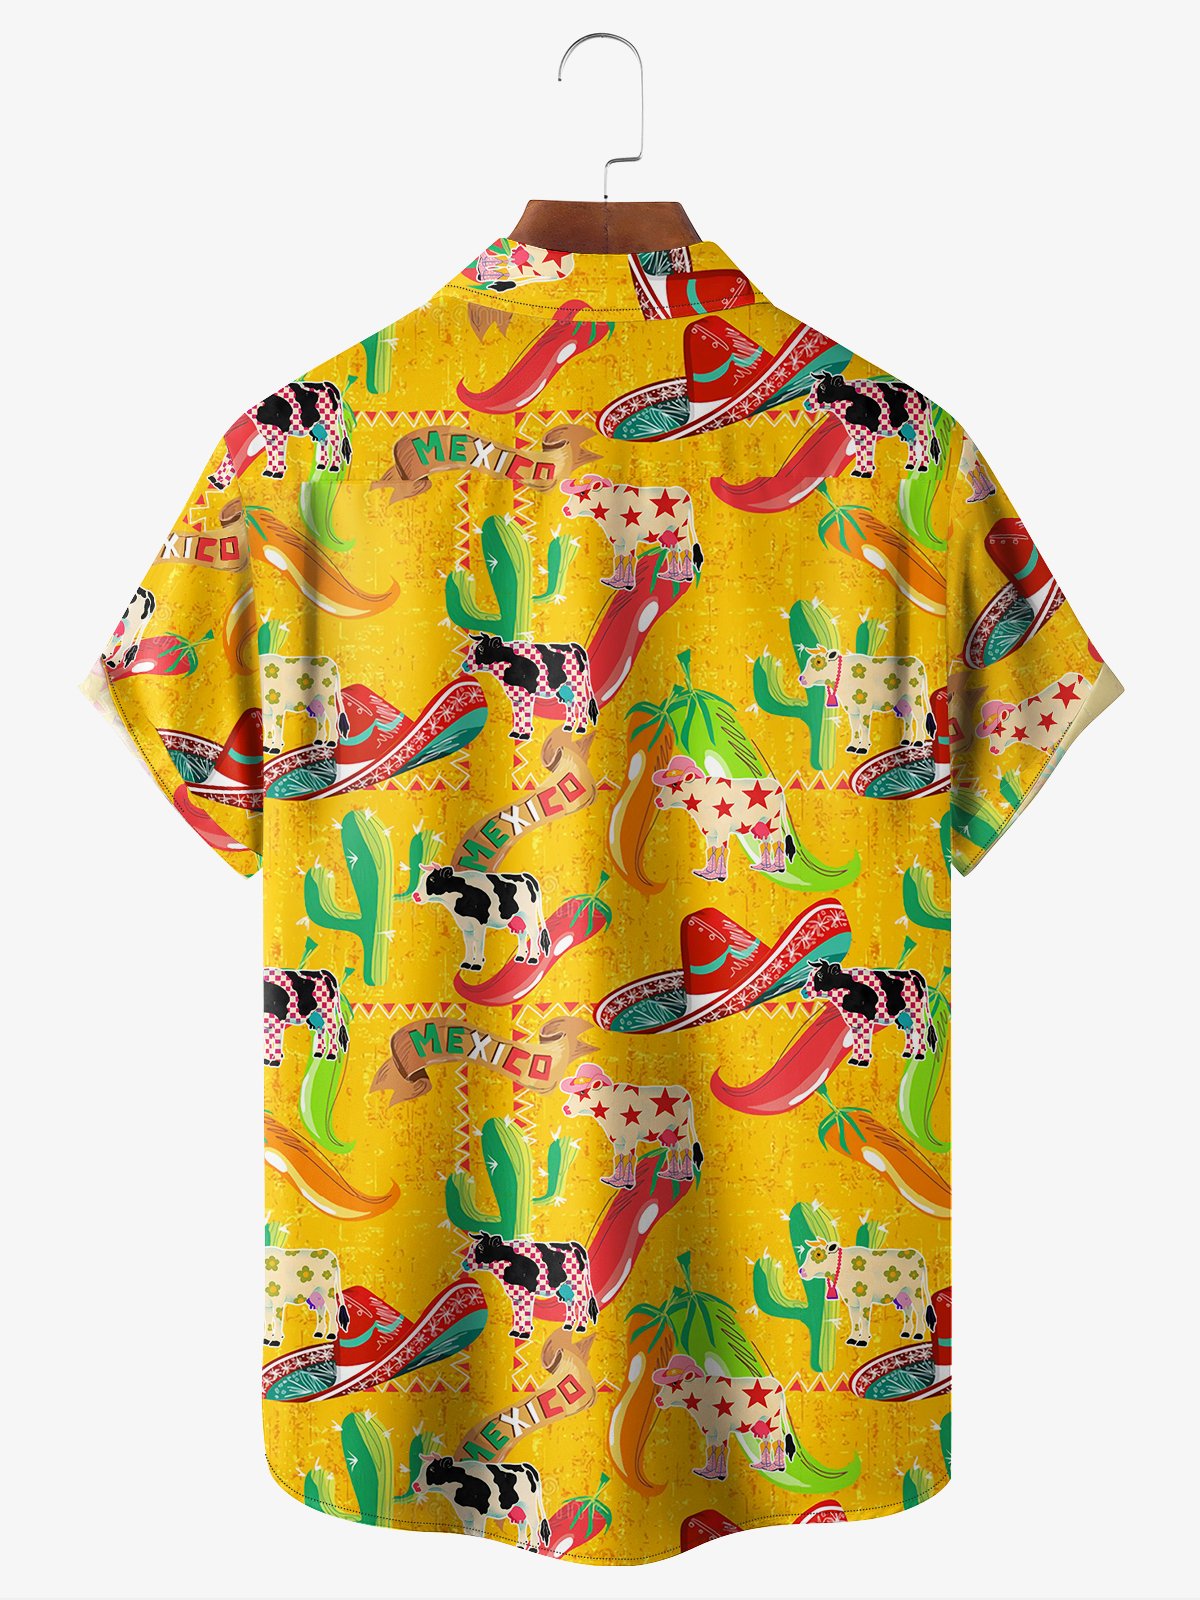 Mexican Cactus Cow Shirt By Andreea Dumuta